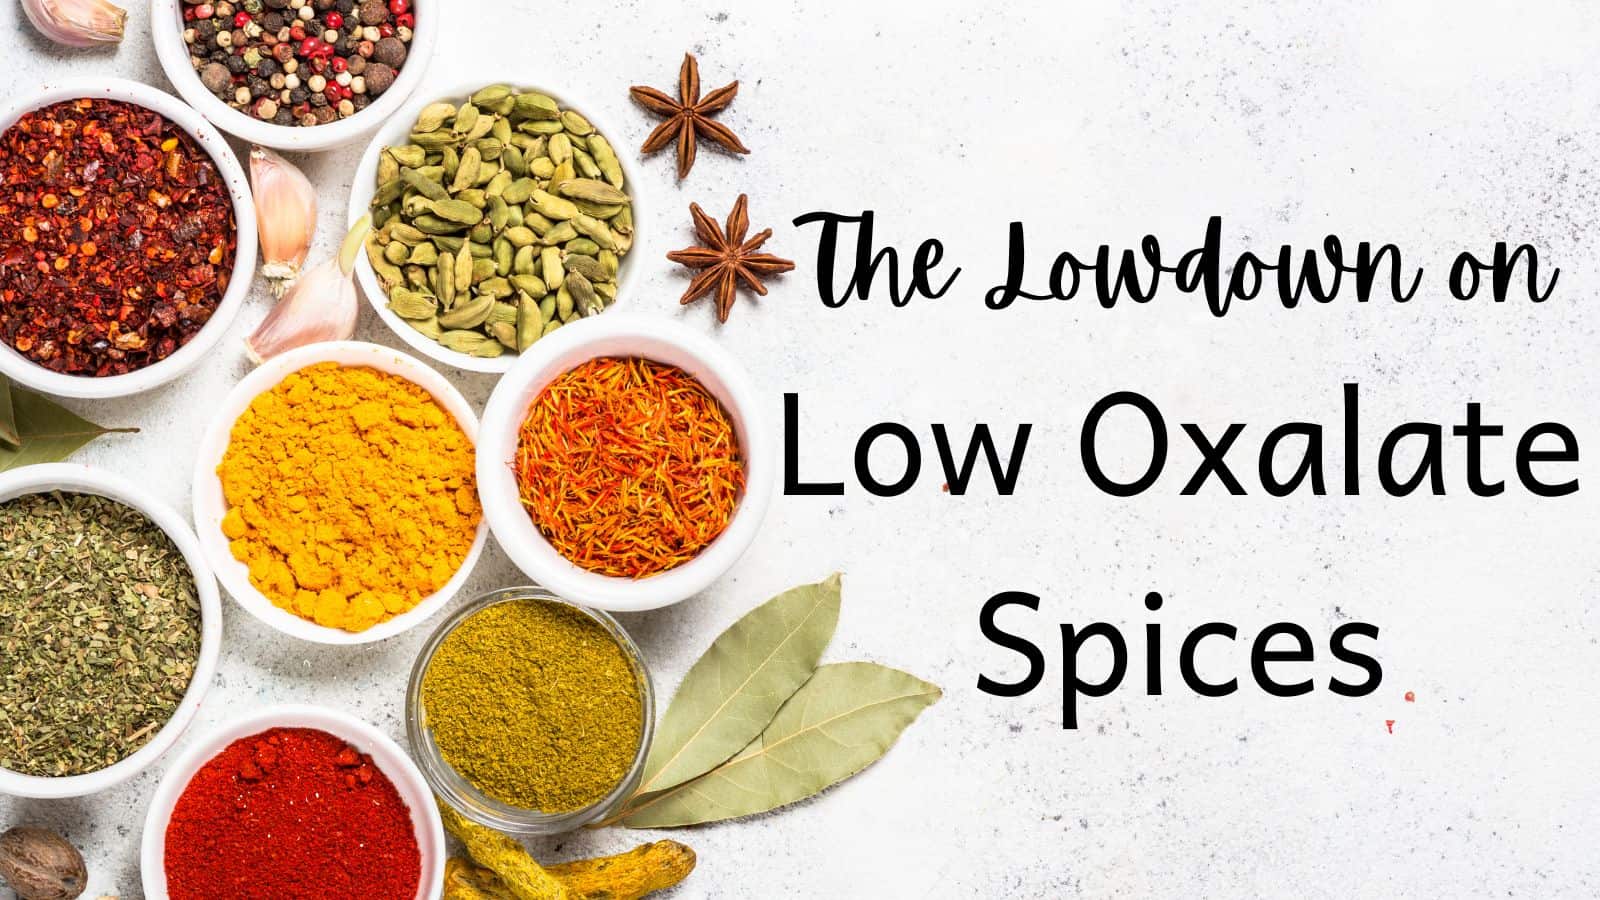 https://www.thekidneydietitian.org/wp-content/uploads/2023/06/The-Lowdown-on-Low-Oxalate-Spices-1600-%C3%97-900-px.jpg